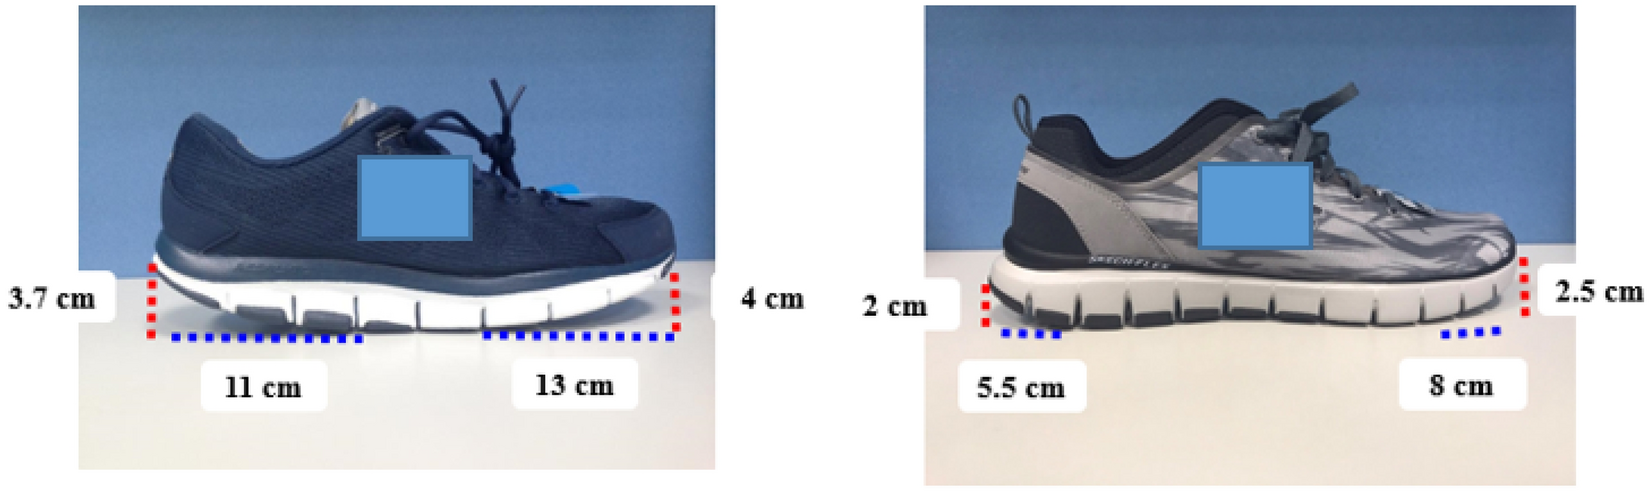 The rocker-soled shoes change the kinematics and muscle contractions of the  lower extremity during various functional movement | Scientific Reports